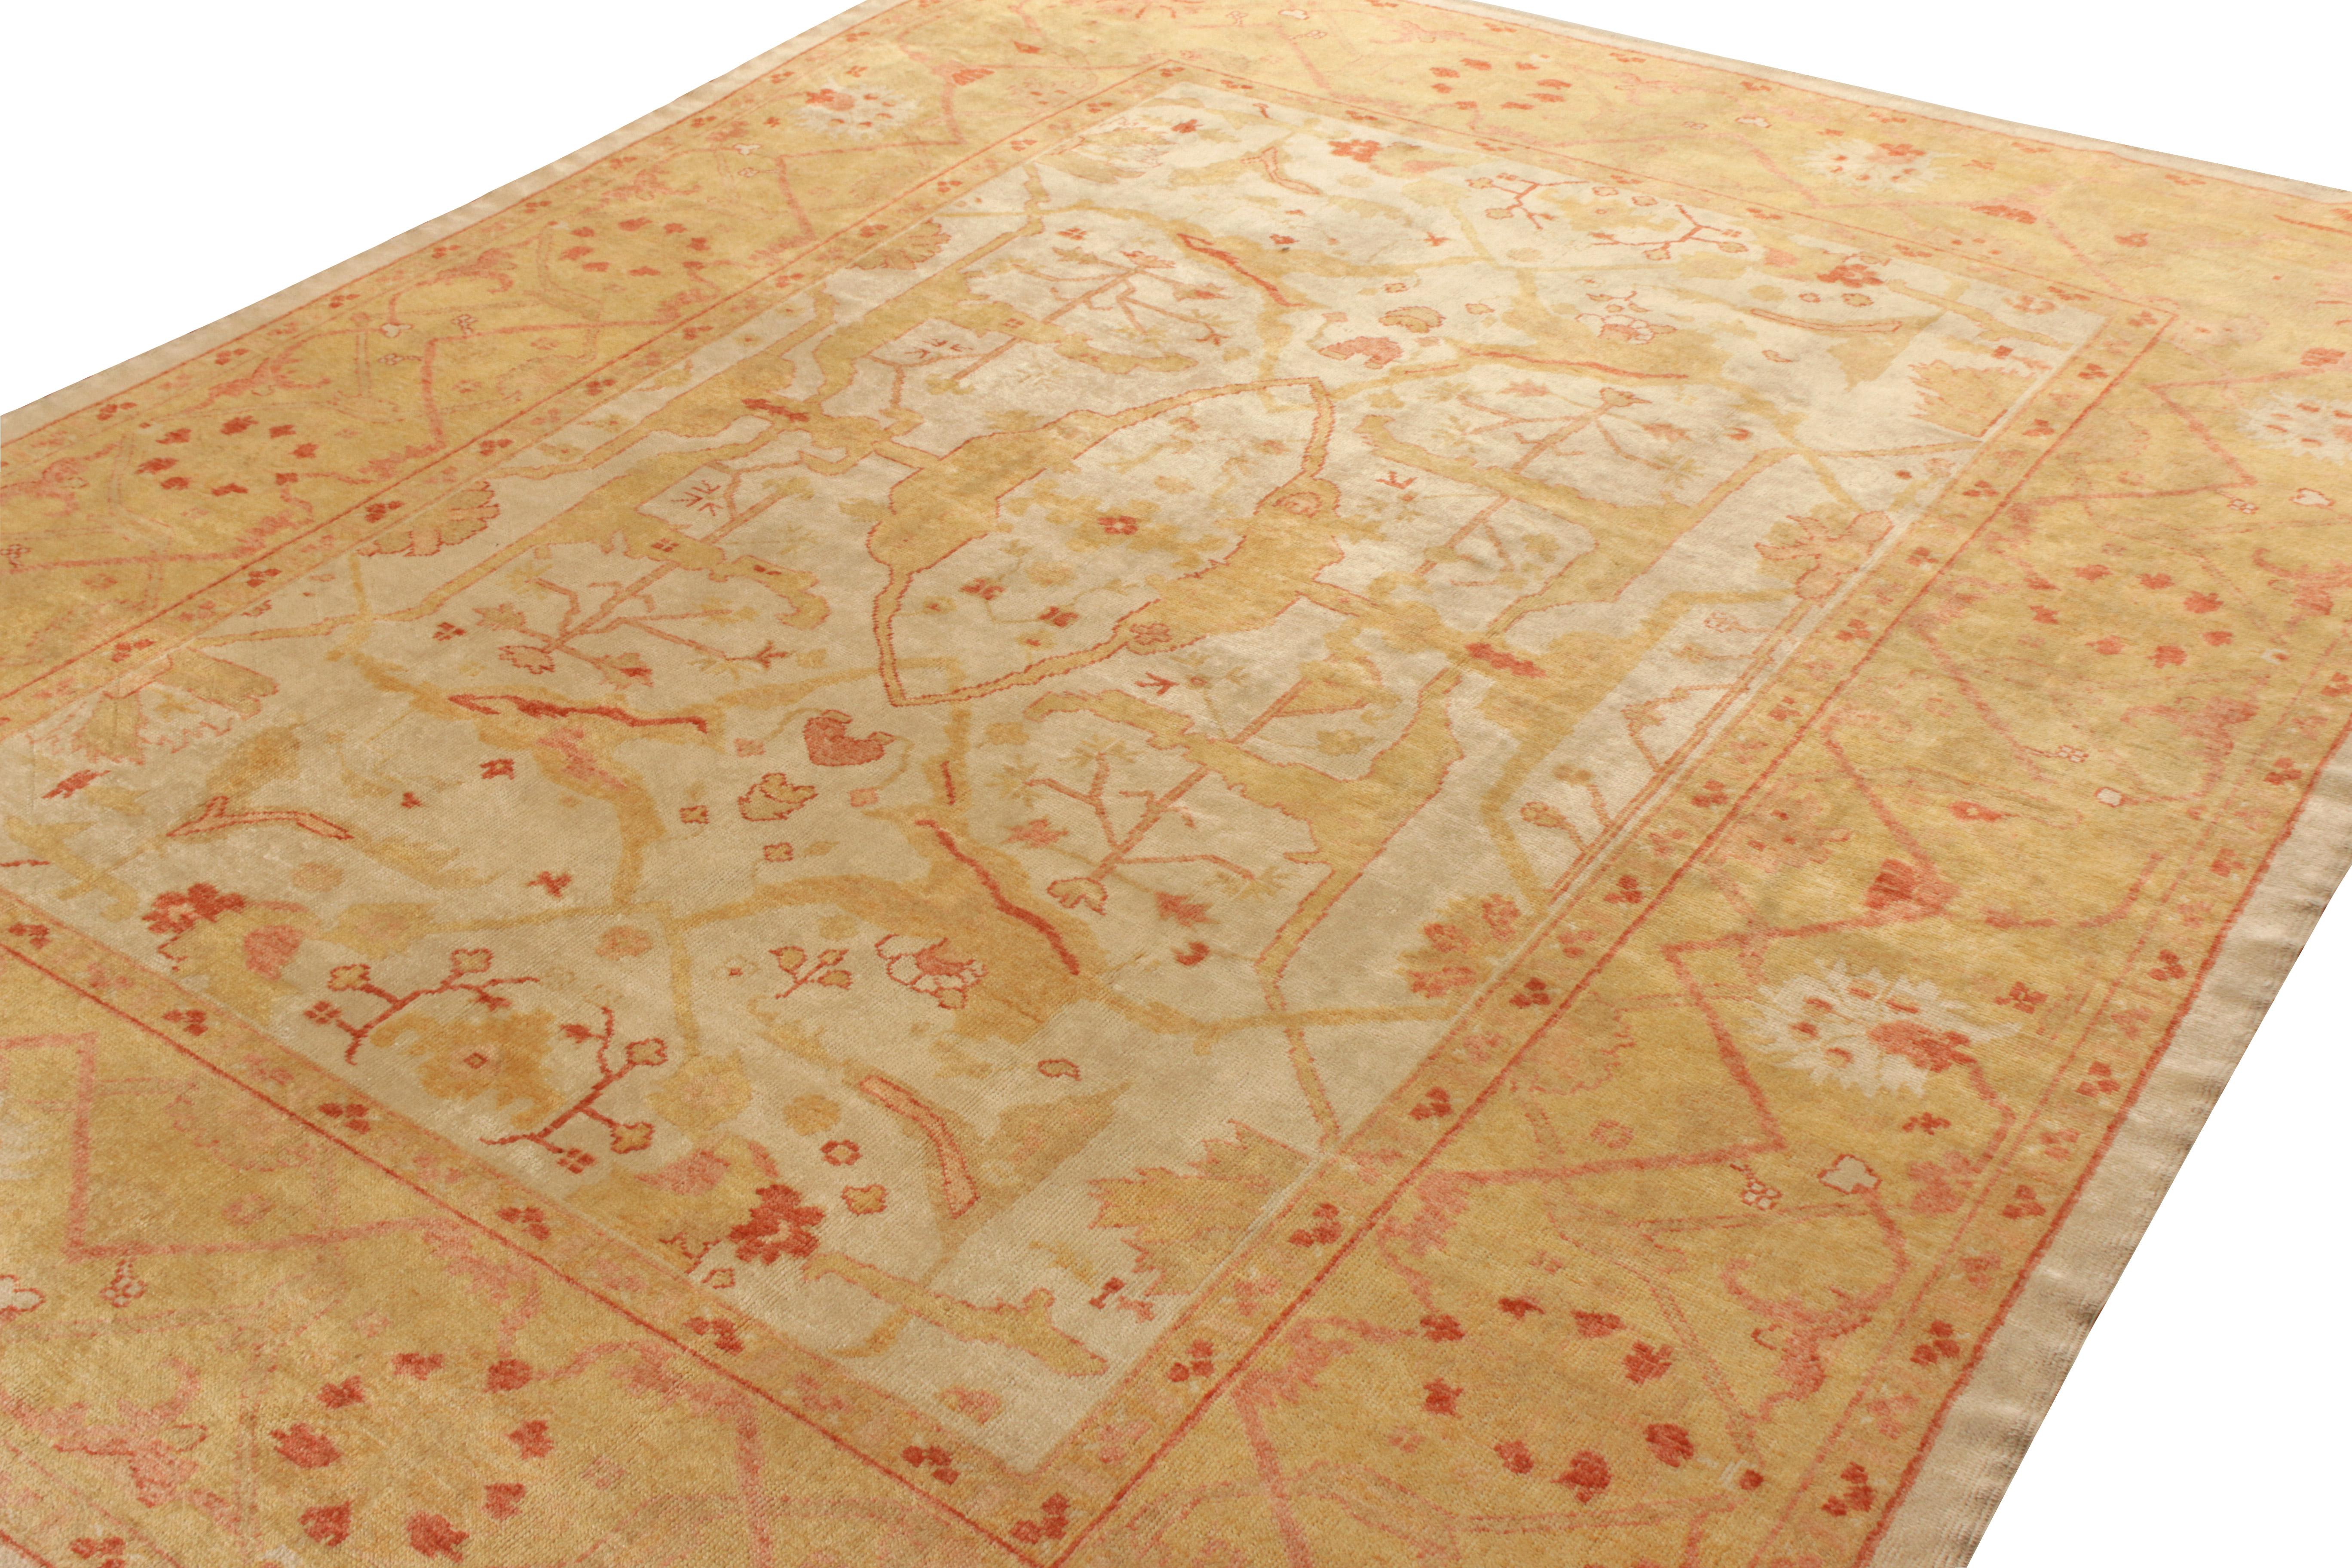 Hand-Knotted Vintage Oushak Rug in All over Gold, Pink-Red Floral Pattern by Rug & Kilim For Sale